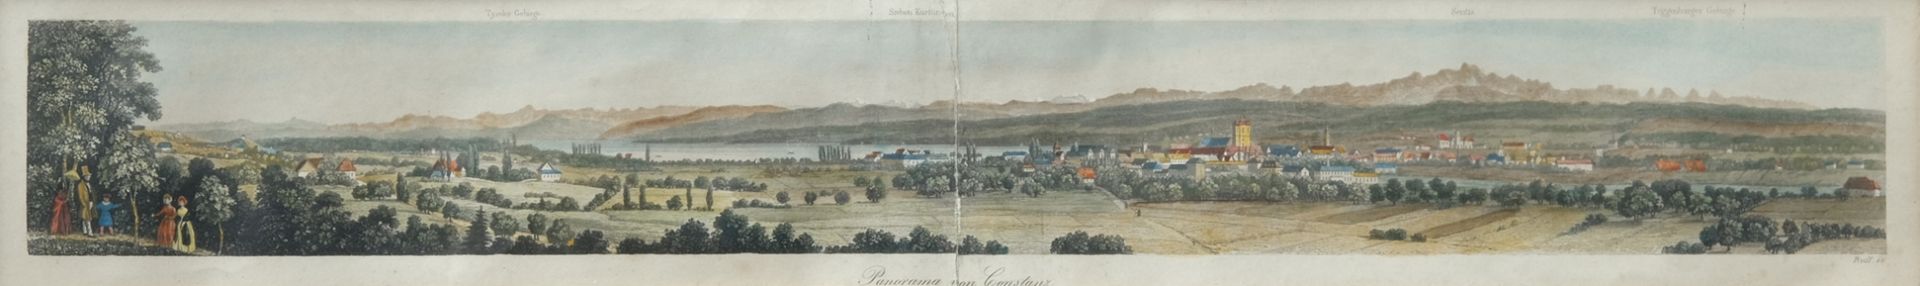 "Panorama of Constance", coloured lithograph. Engraved by "Ruff". Folded in the centre and slightly